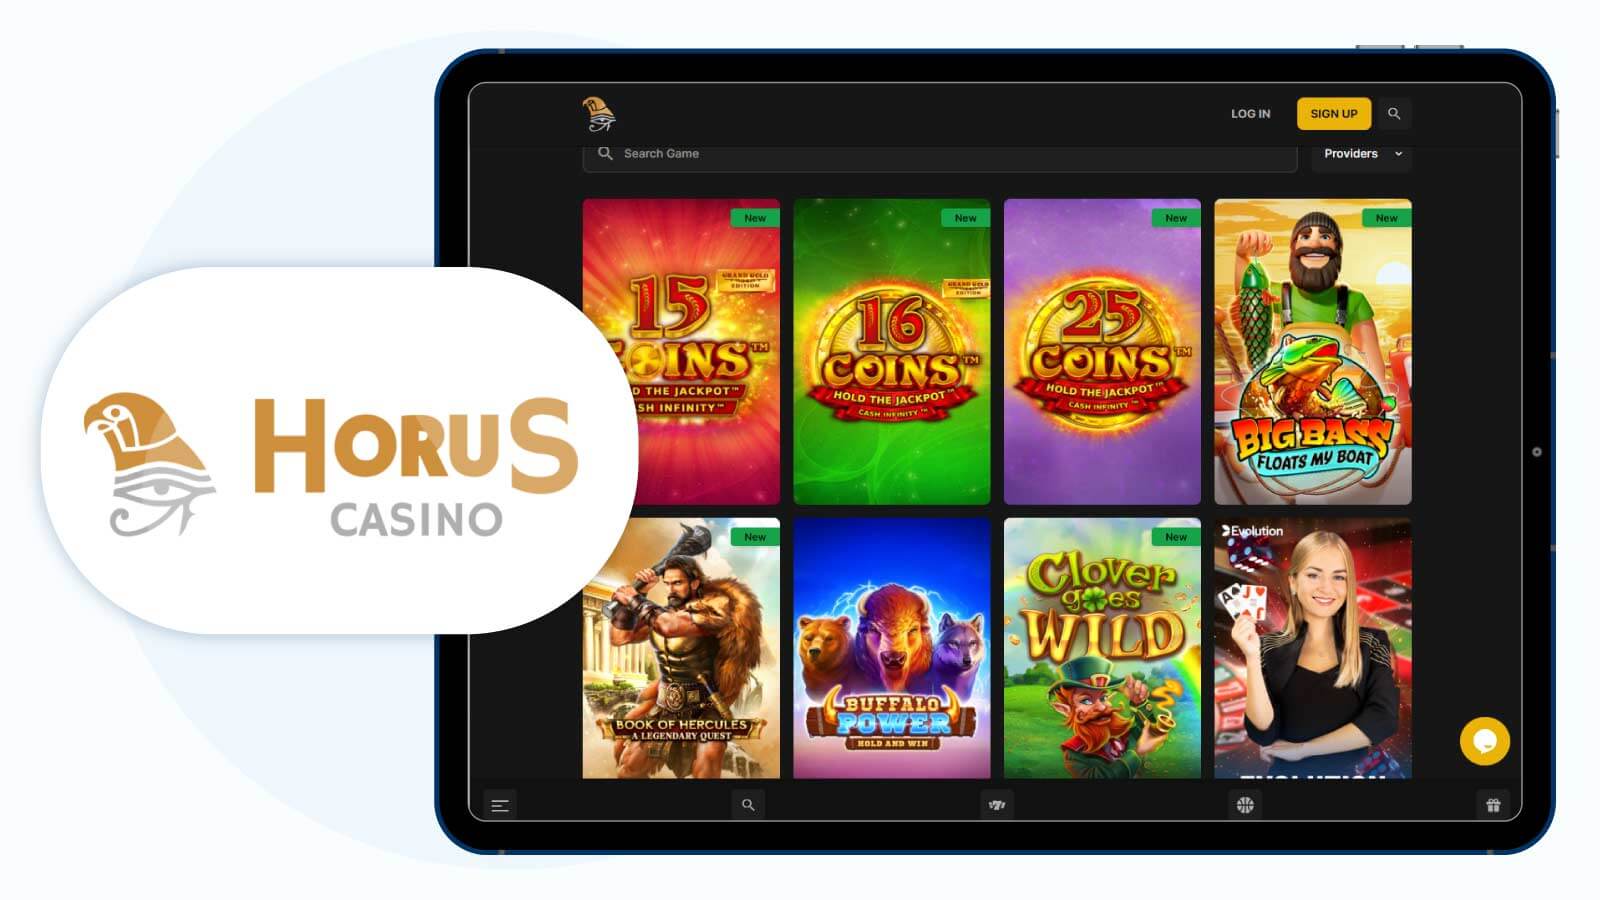 Horus-Casino-Second-Best-No-Wagering-Free-Spins-No-Deposit-to-Consider